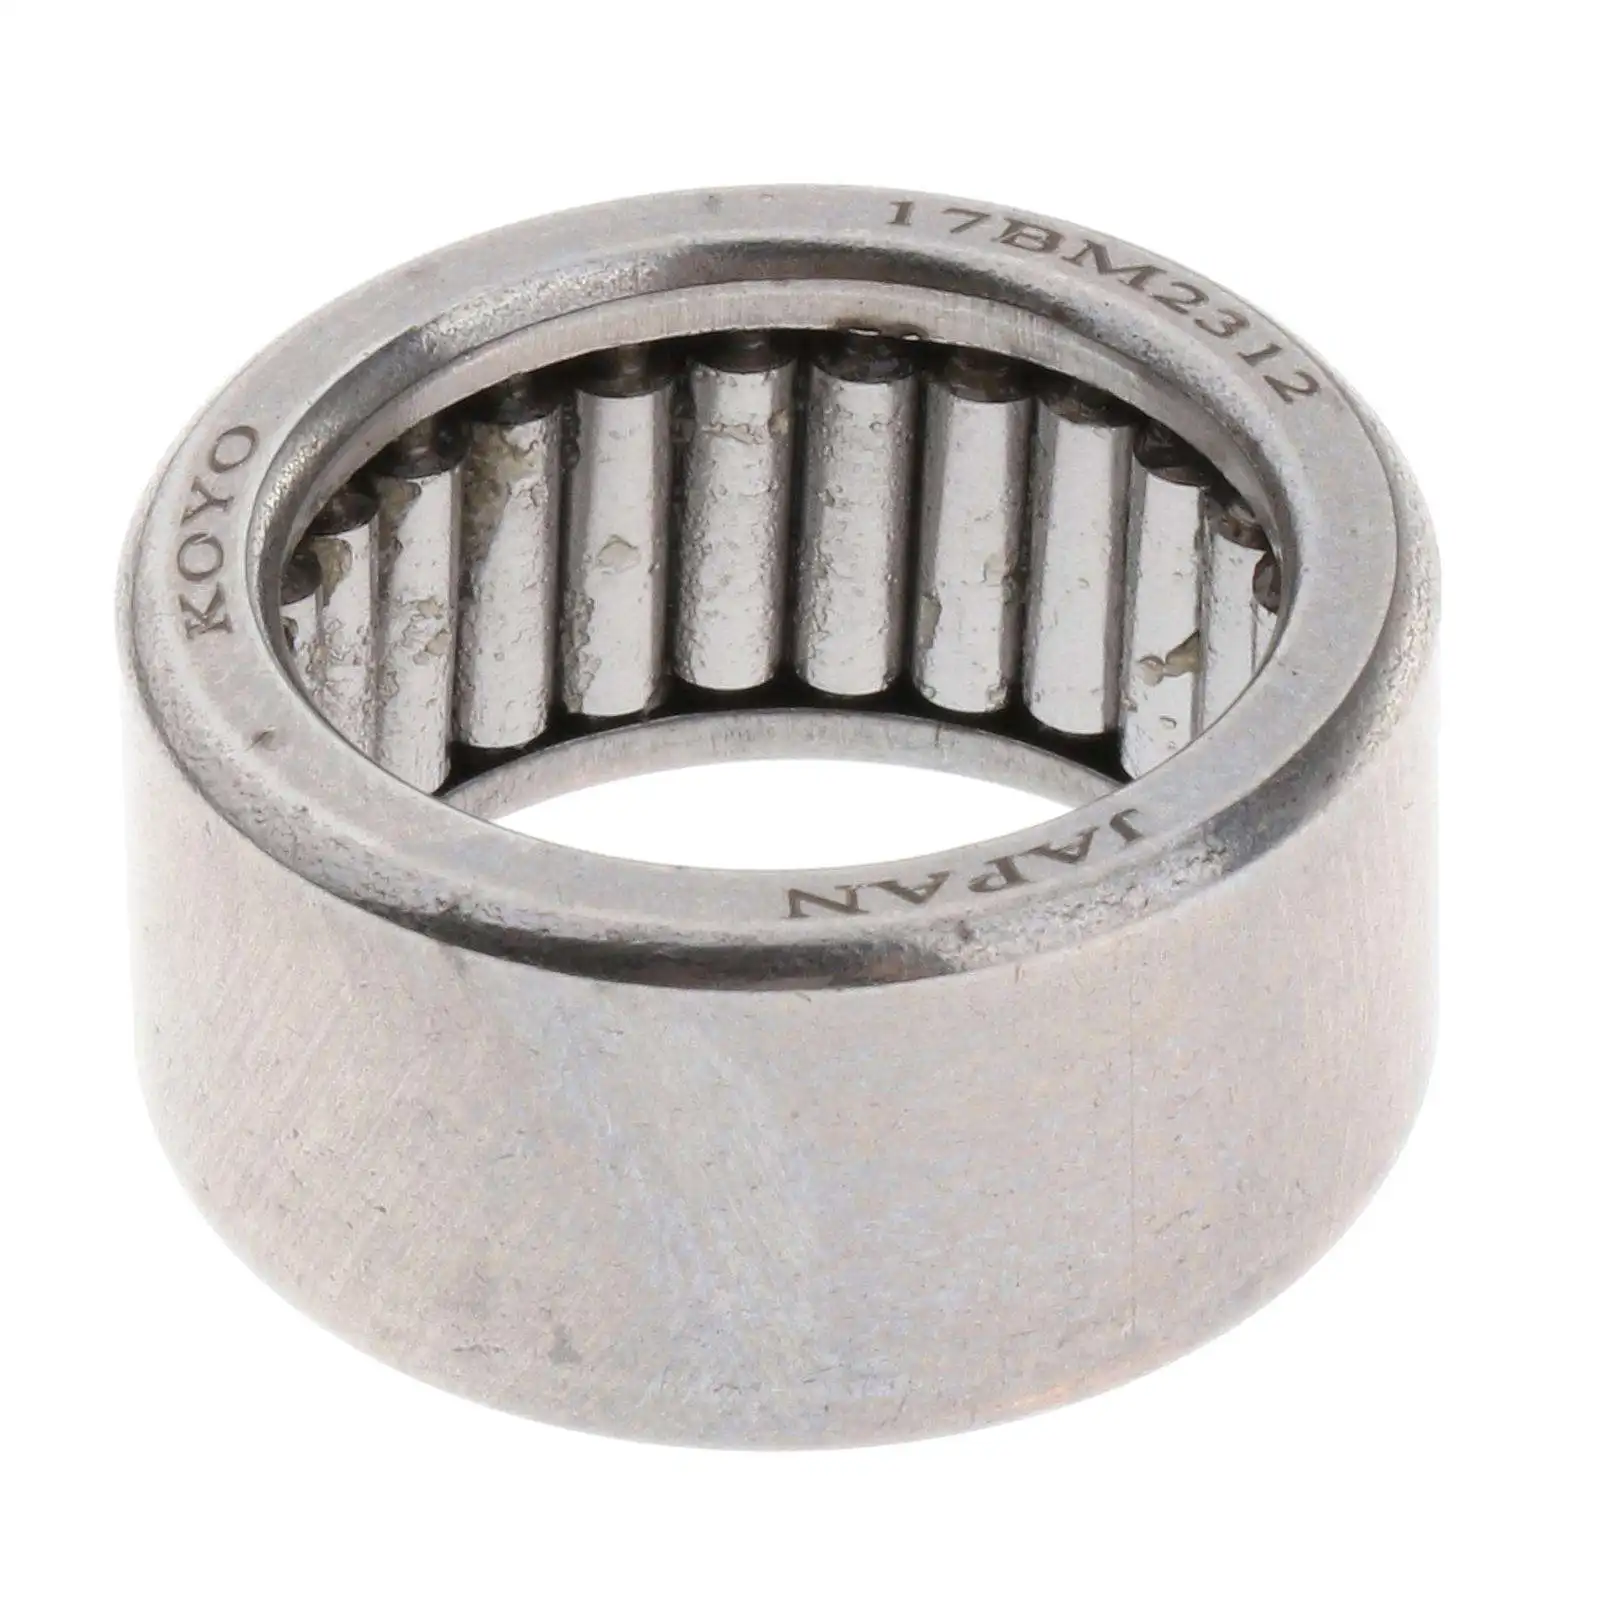 0.87inch Lower Casing  Bearing Spare Parts Durable Practical for 9.9HP 15HP Yamaha Outboard Engine Motor Silver